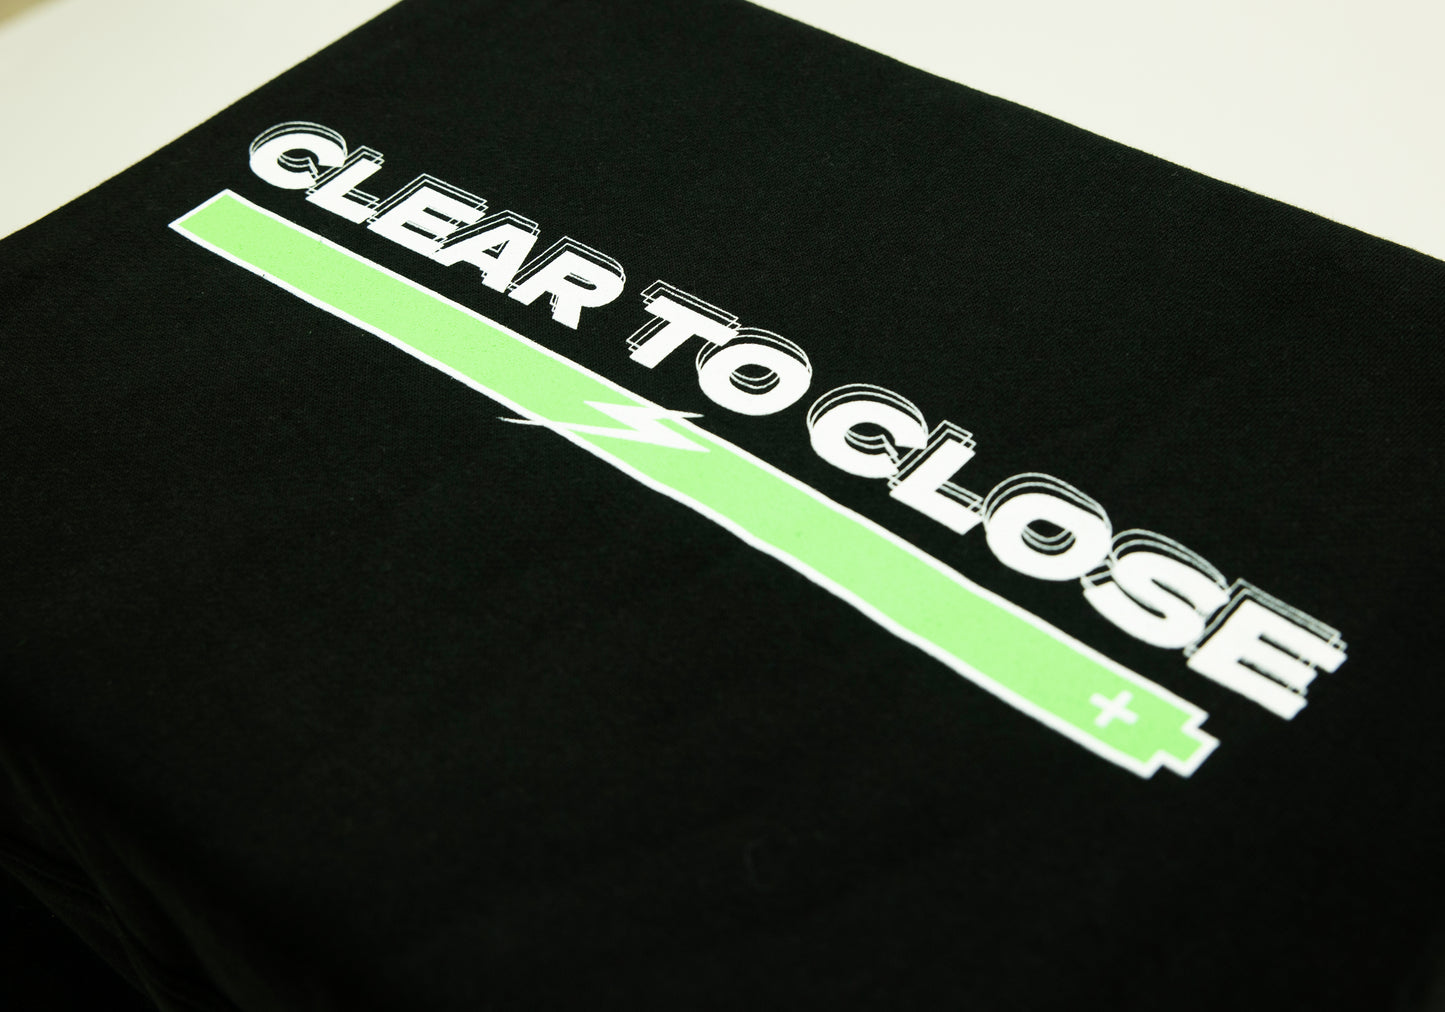 Clear To Close Hoodie